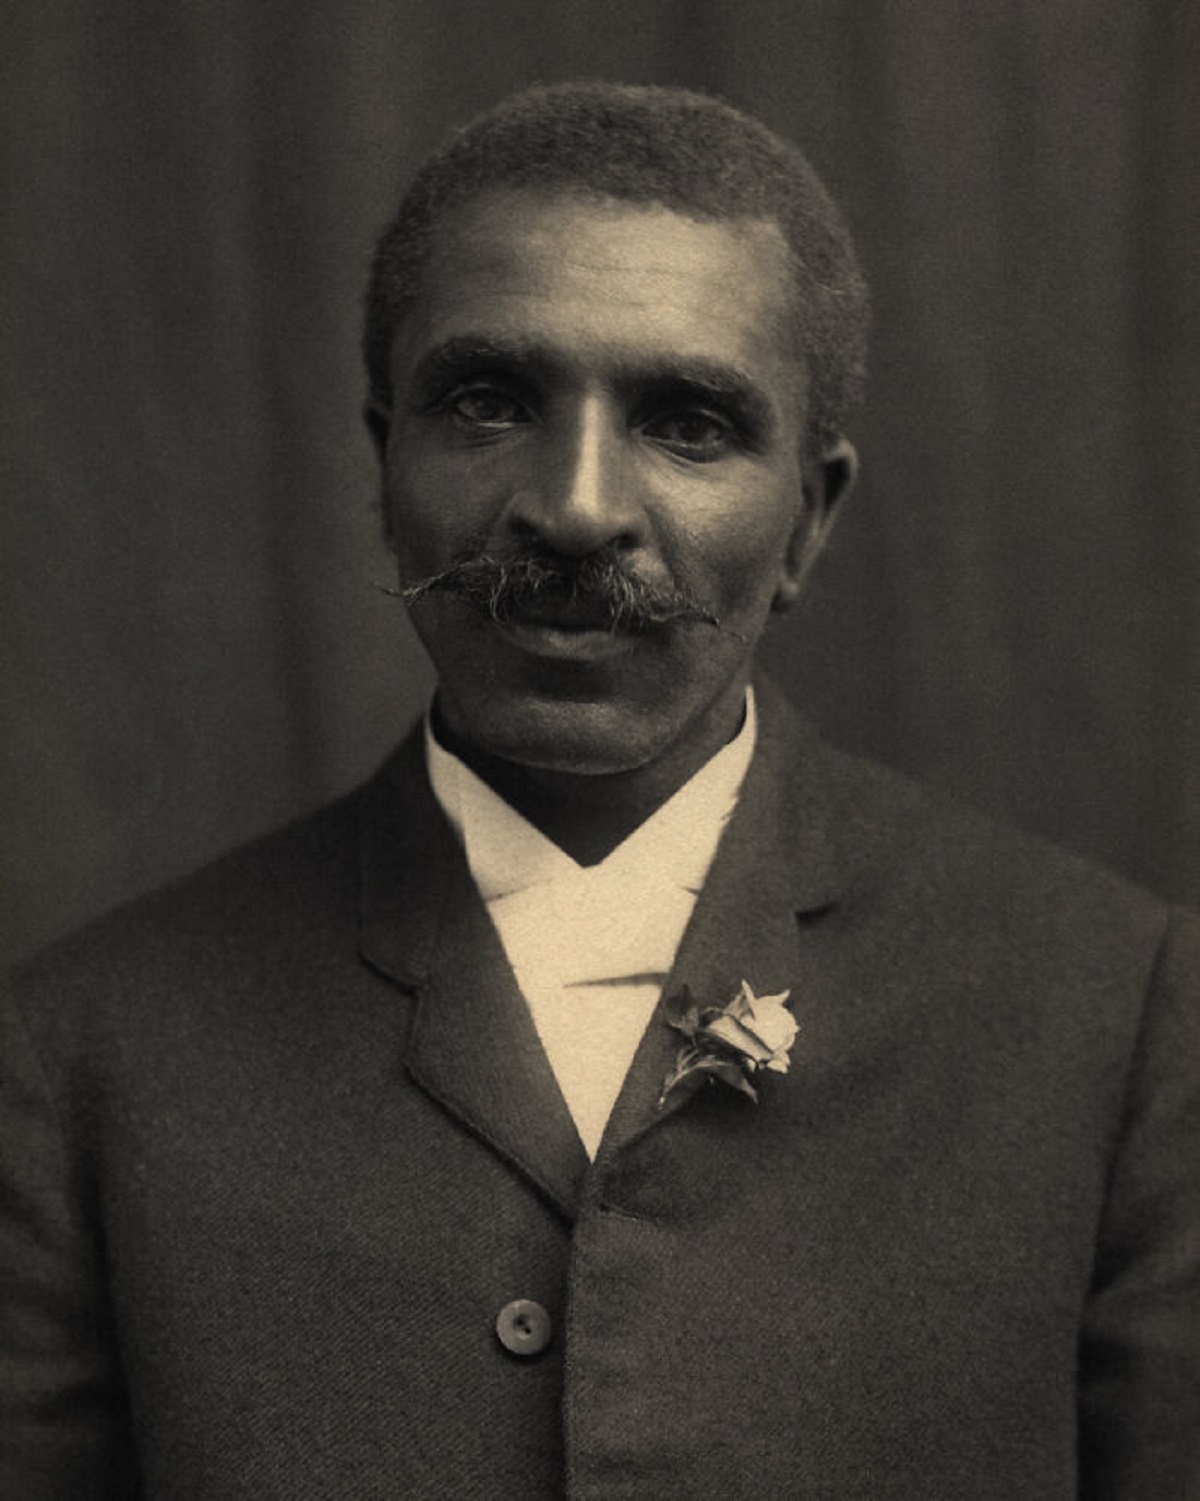 That famed scientist George Washington Carver had a respiratory infection in his youth which him with an unusually high pitched voice that “startled all who met him.”